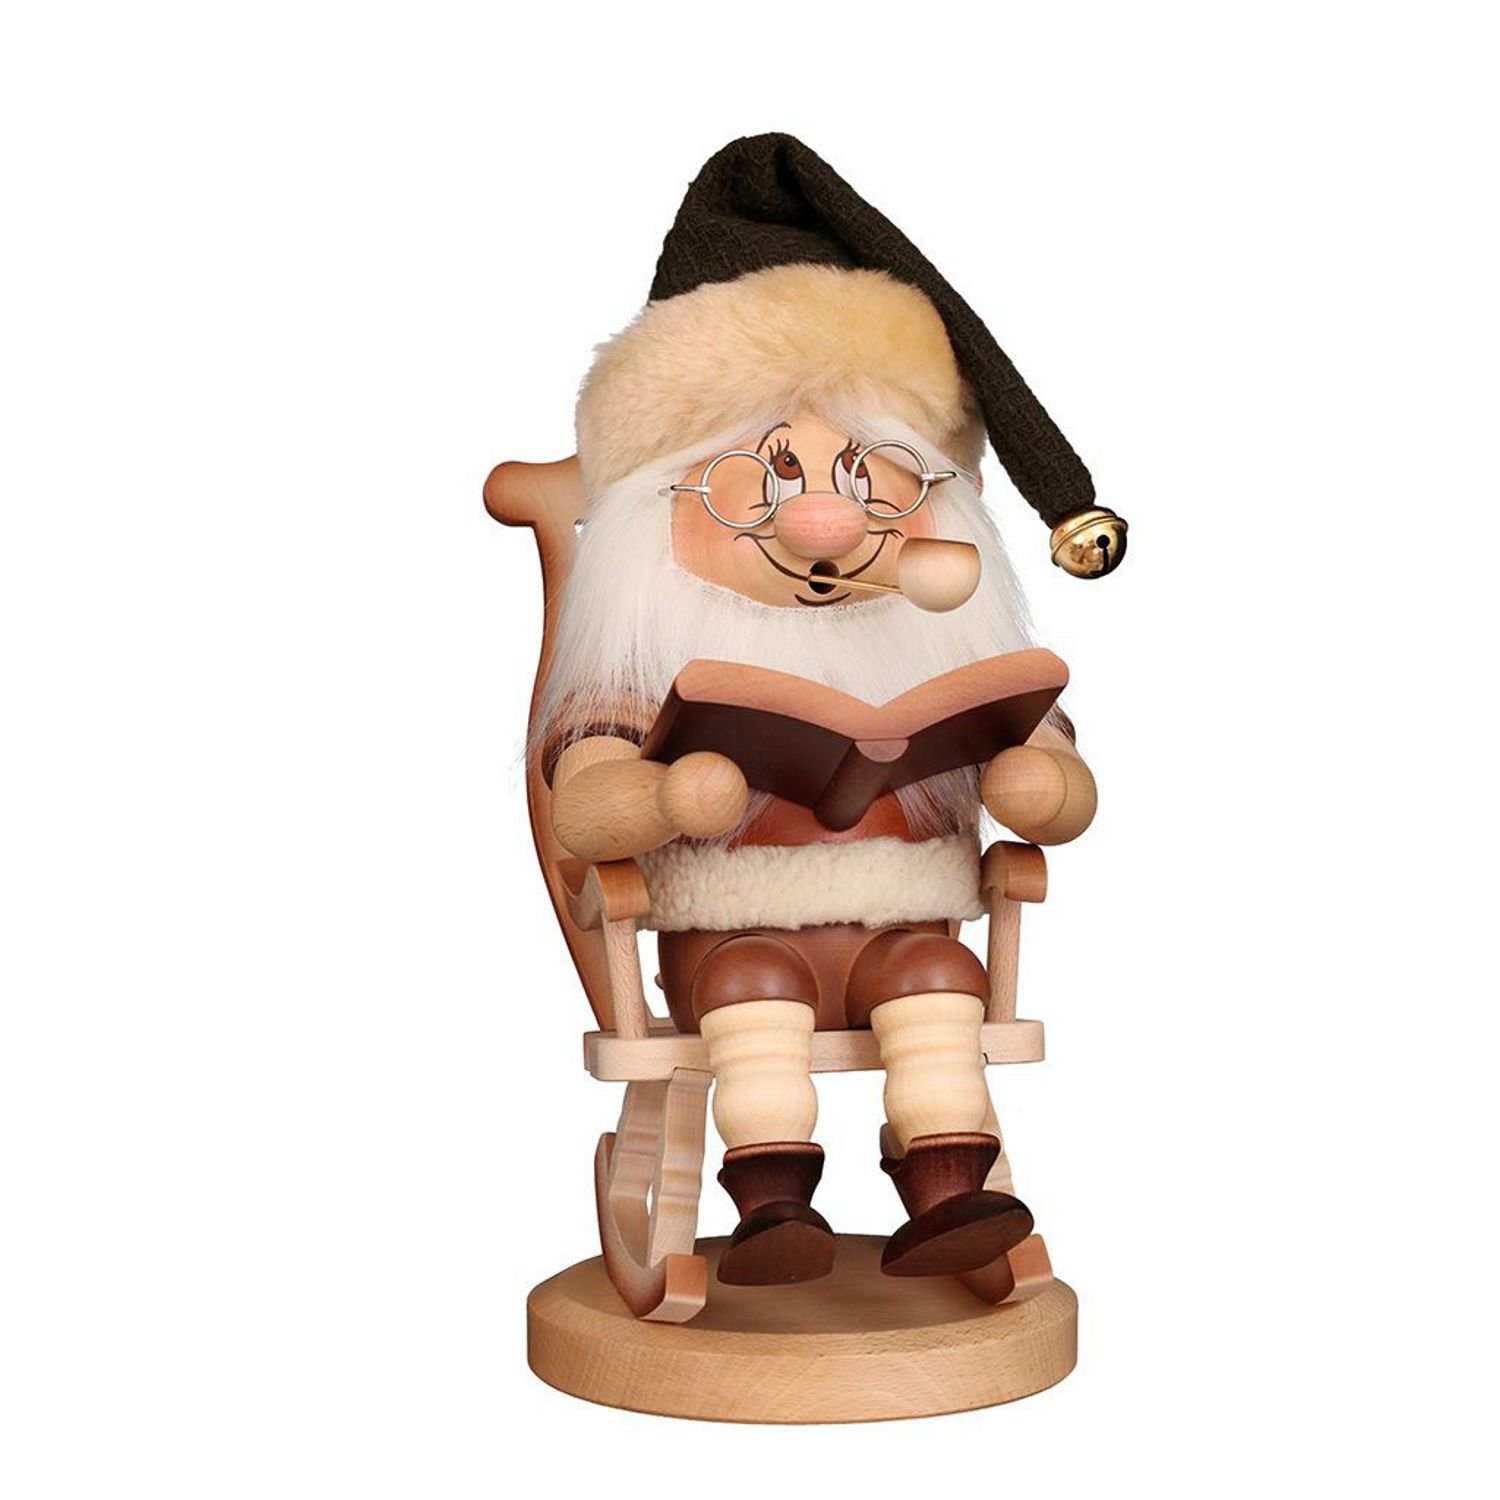 Smoking figure gnome in a rocking chair